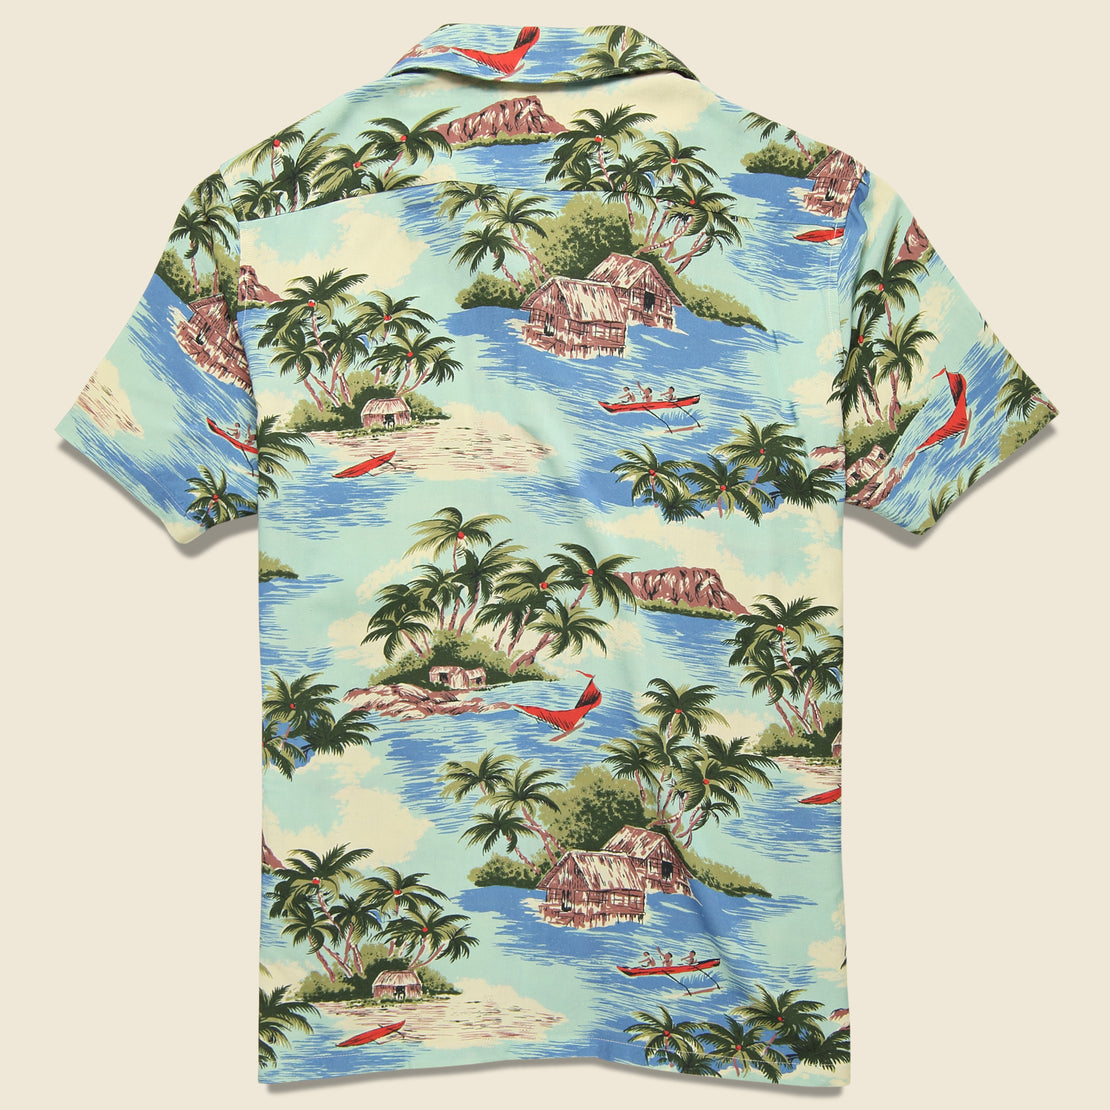 Kona Camp Shirt - Kapalua Bay - Faherty - STAG Provisions - Tops - S/S Woven - Floral